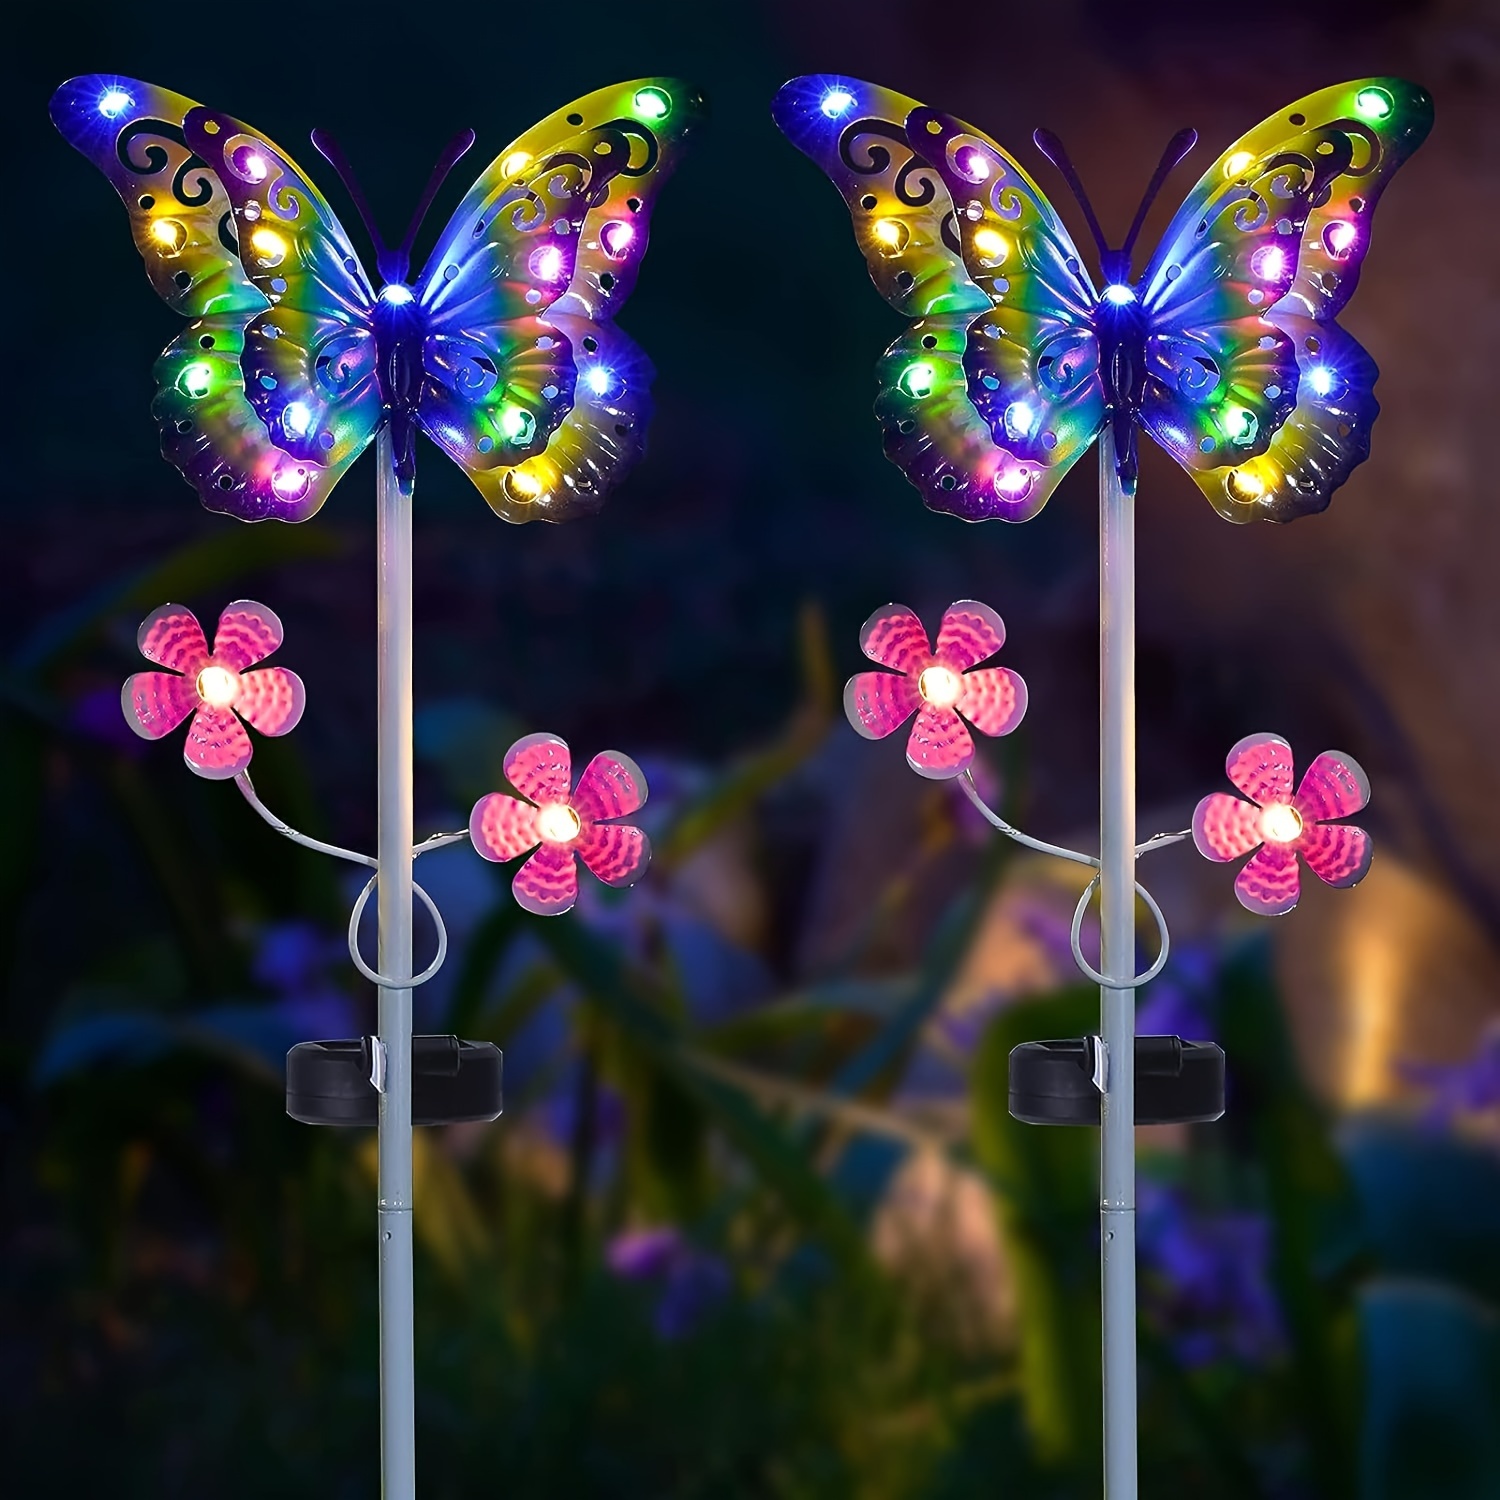 

Outdoor - 2 Pack Solar Metal Butterfly Decorative Lights - Newest Colorful Led Waterproof Solar Stake Lights For Garden, Patio, Yard, Lawn, Walkway Decoration (blue/yellow)